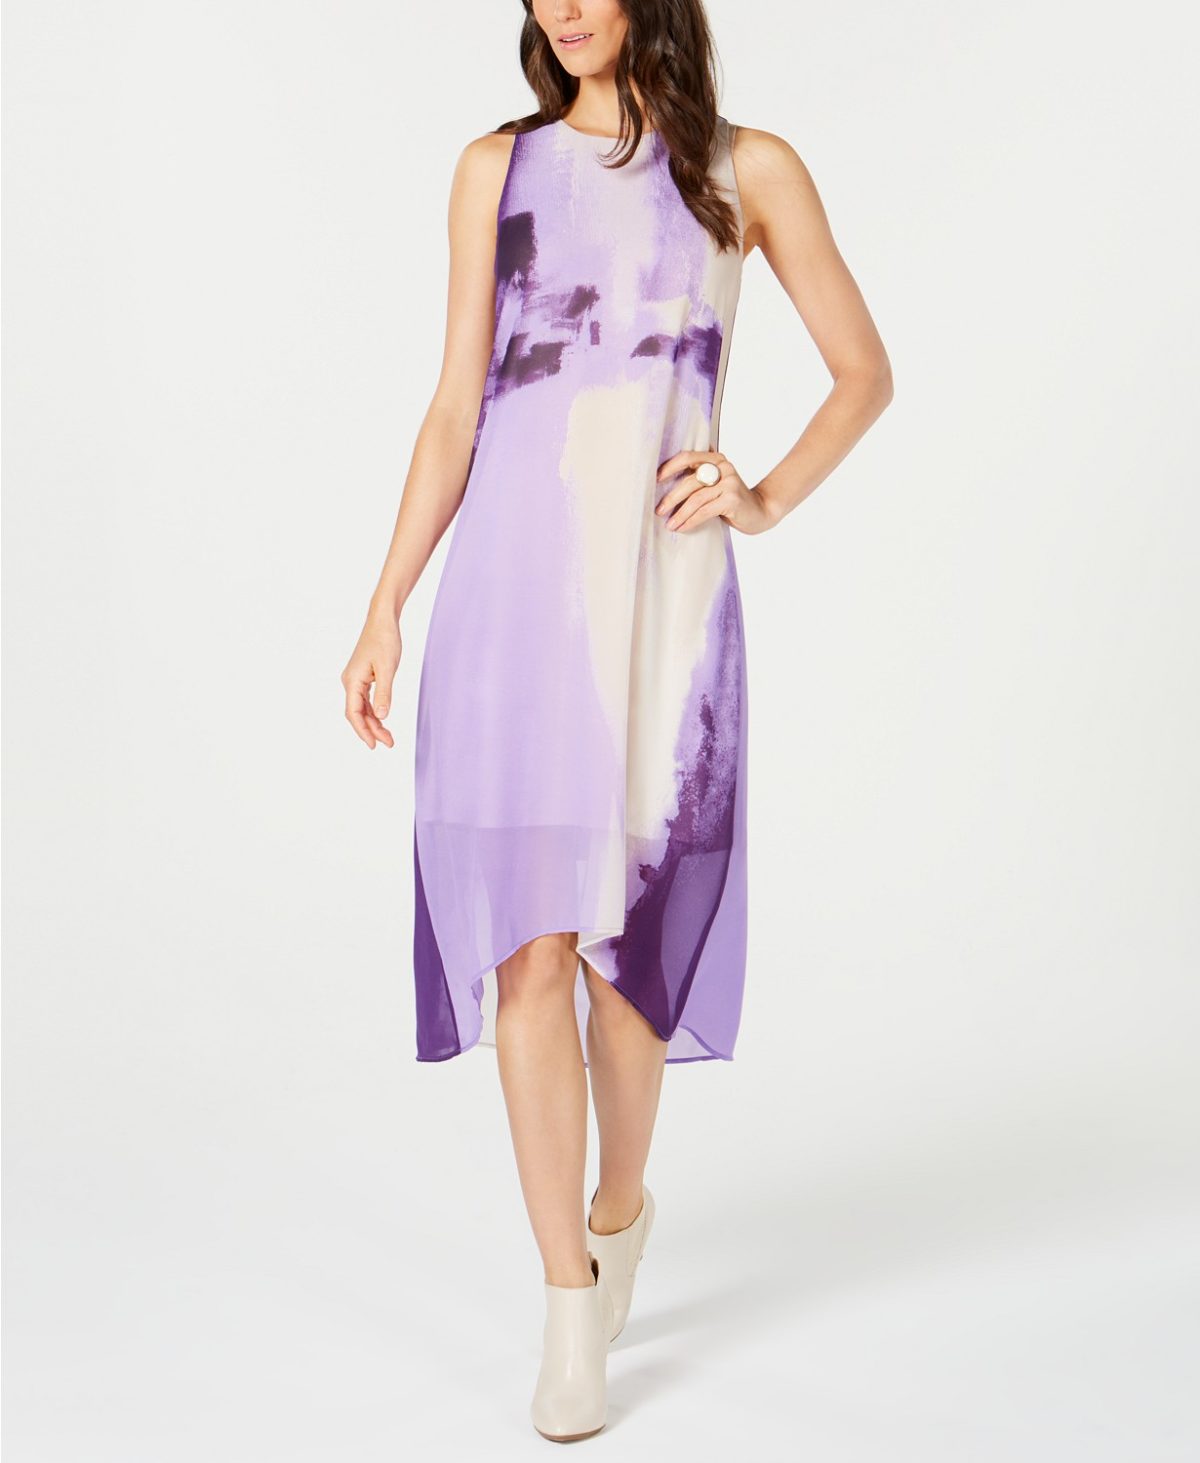 floral-print-high-low-dress-easter-fashion-for-women